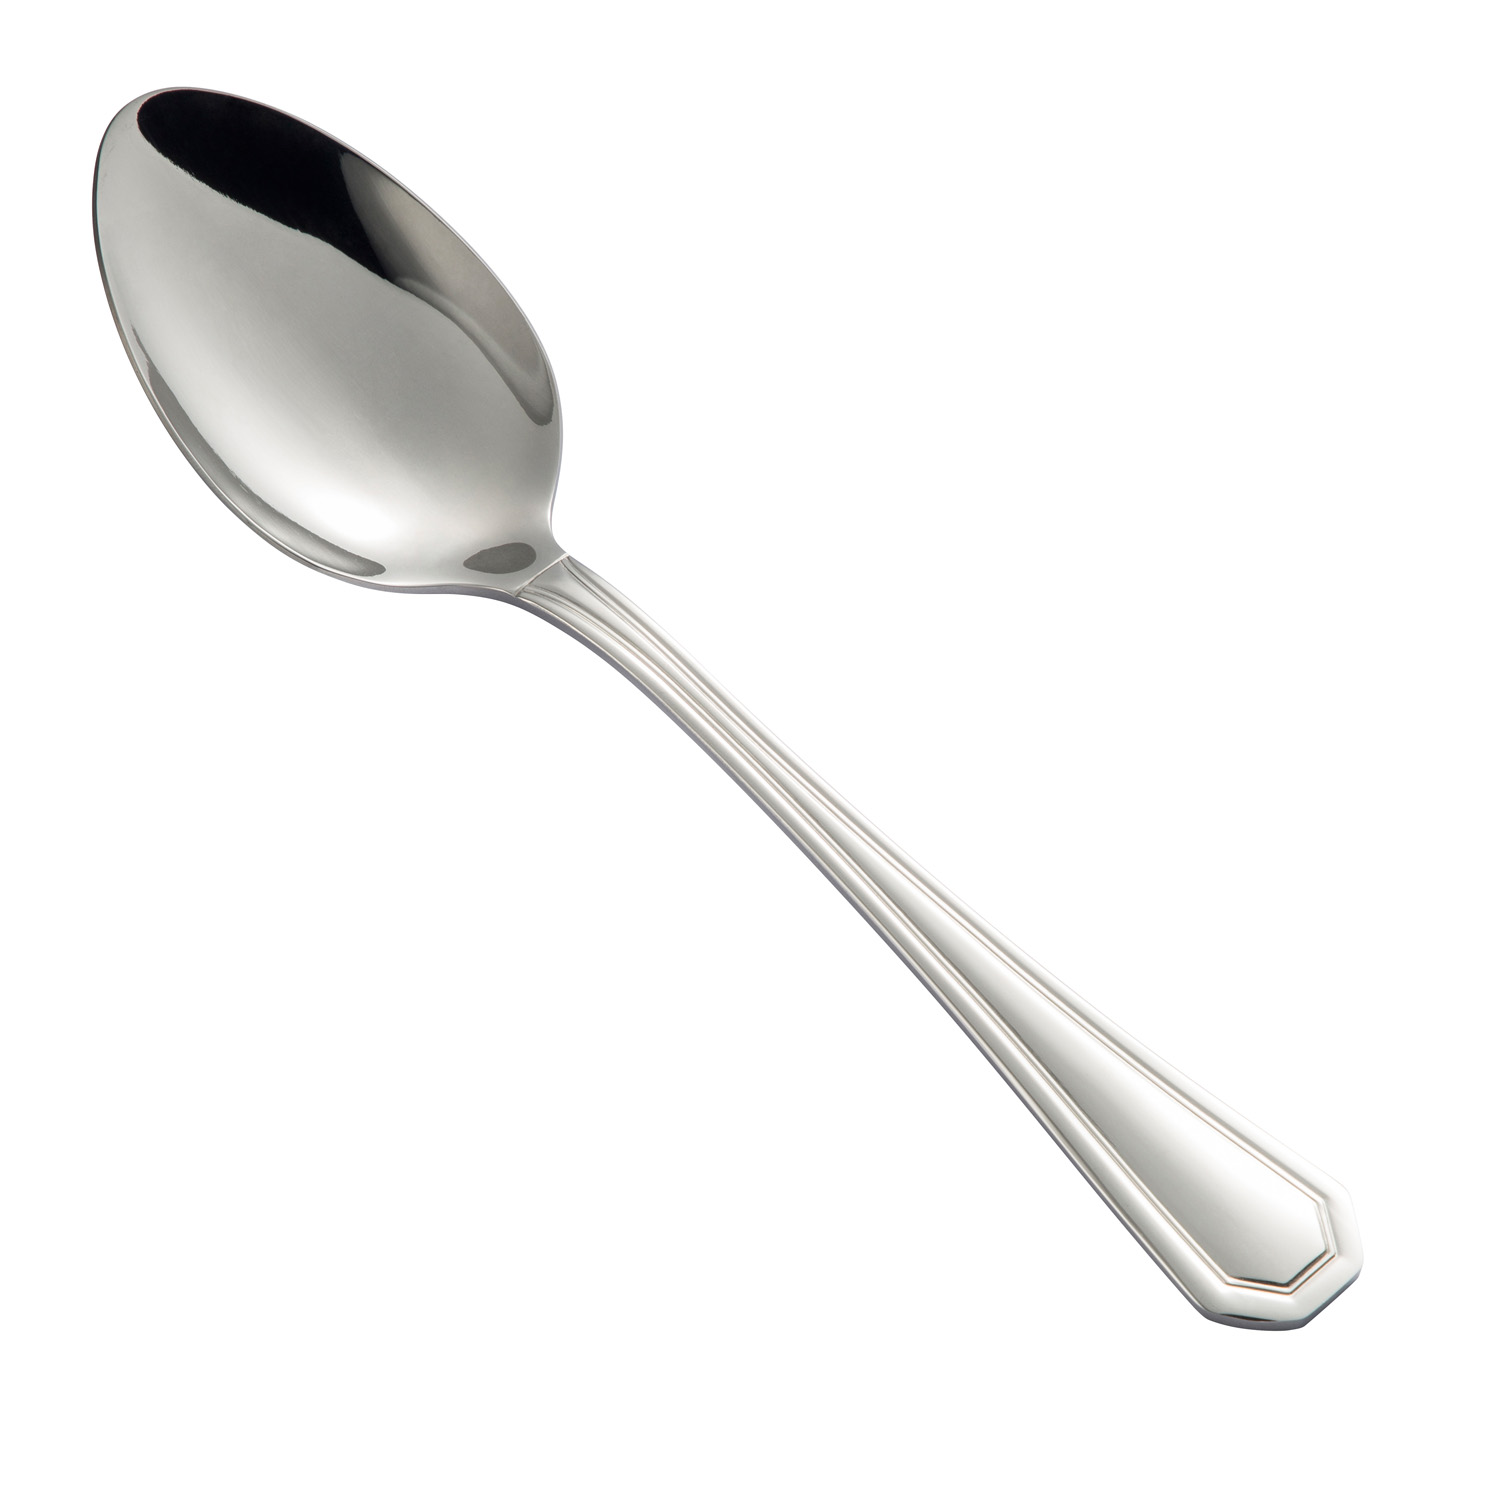 CAC China 8006-10 Lux Tablespoon, Extra Heavy Weight 18/8, 8 1/4" - 1 dozen